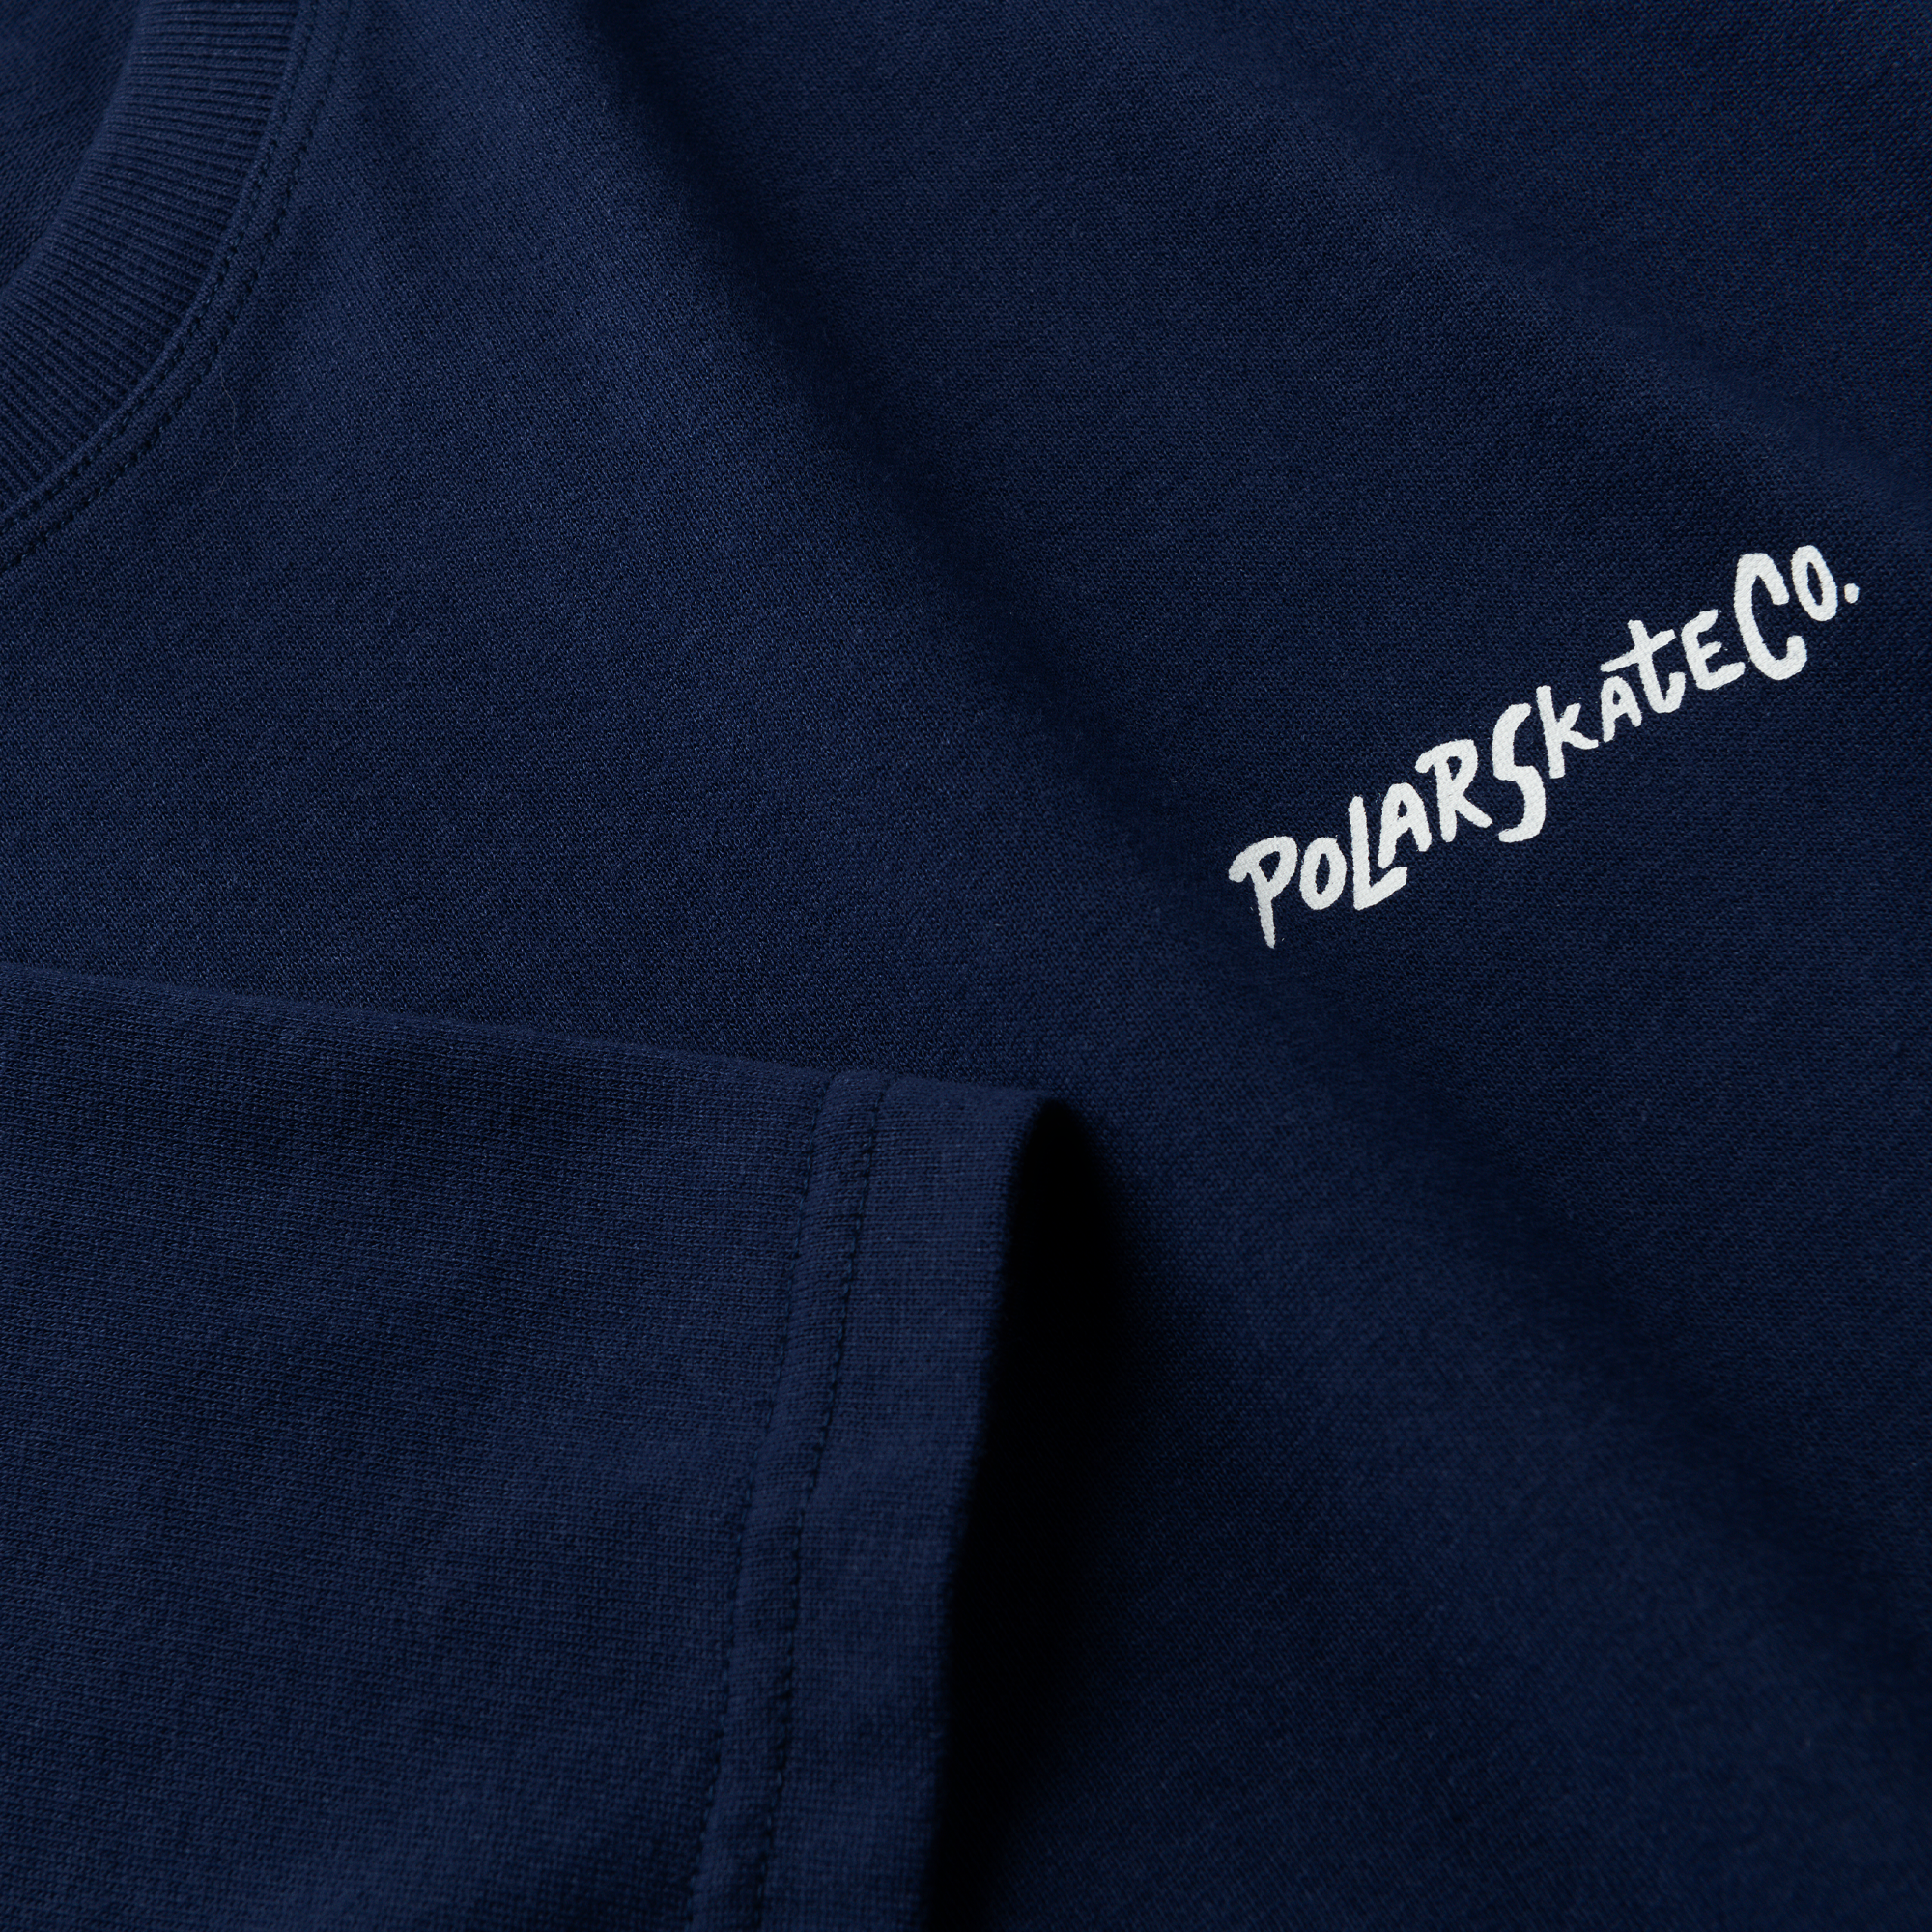 Dark blue polar T-shirt with white logo on front and white graphic on back. Free uk shipping on orders over £50